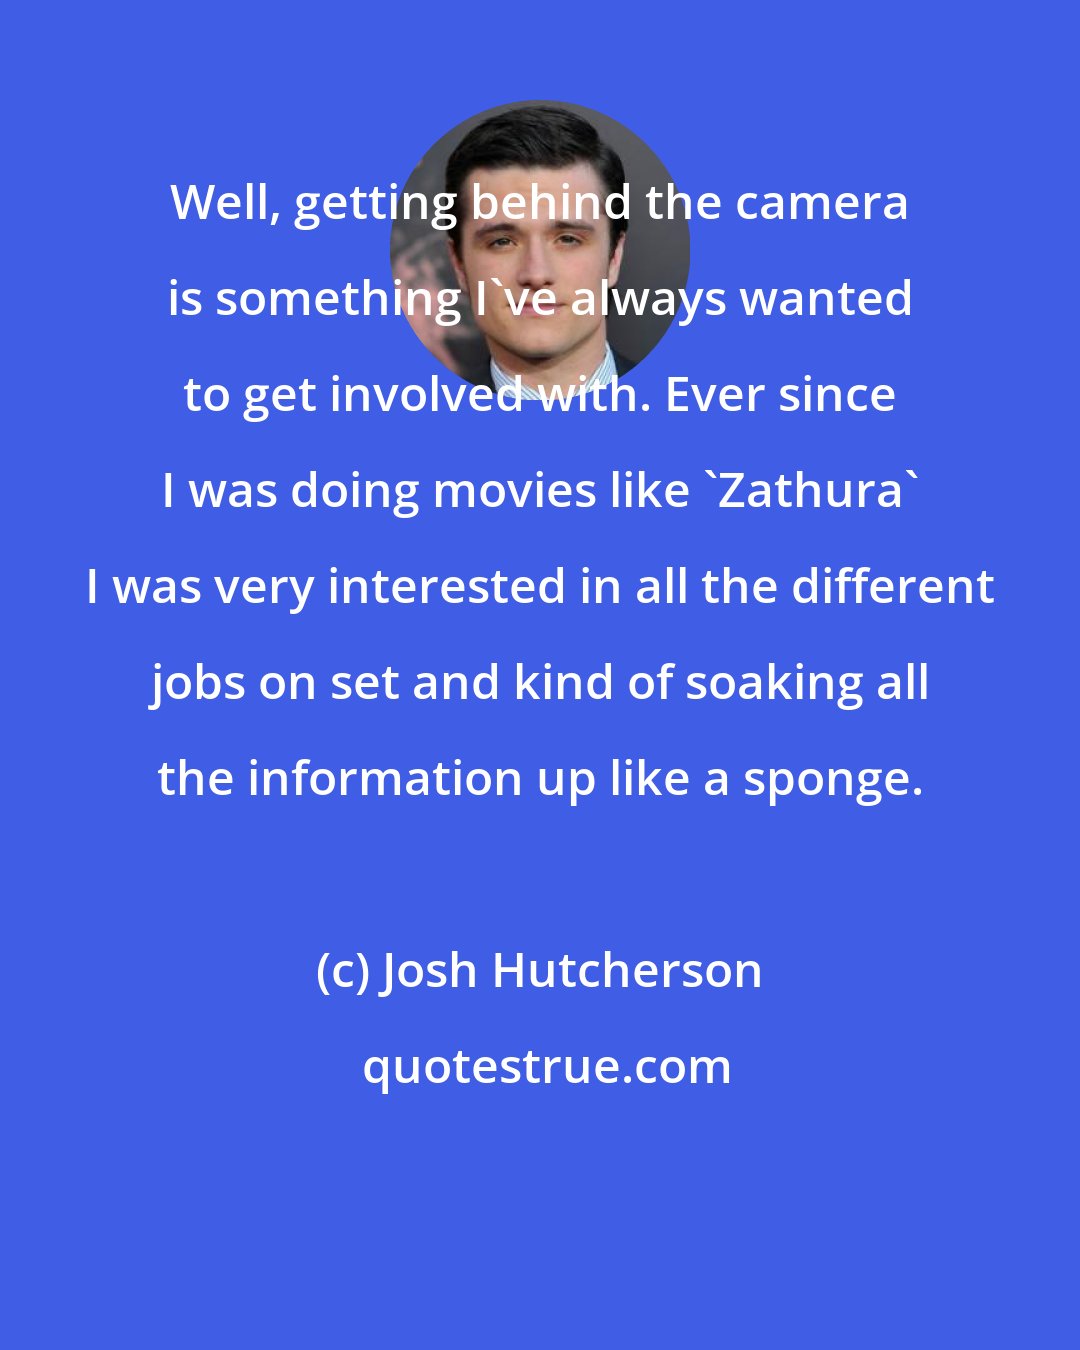 Josh Hutcherson: Well, getting behind the camera is something I've always wanted to get involved with. Ever since I was doing movies like 'Zathura' I was very interested in all the different jobs on set and kind of soaking all the information up like a sponge.